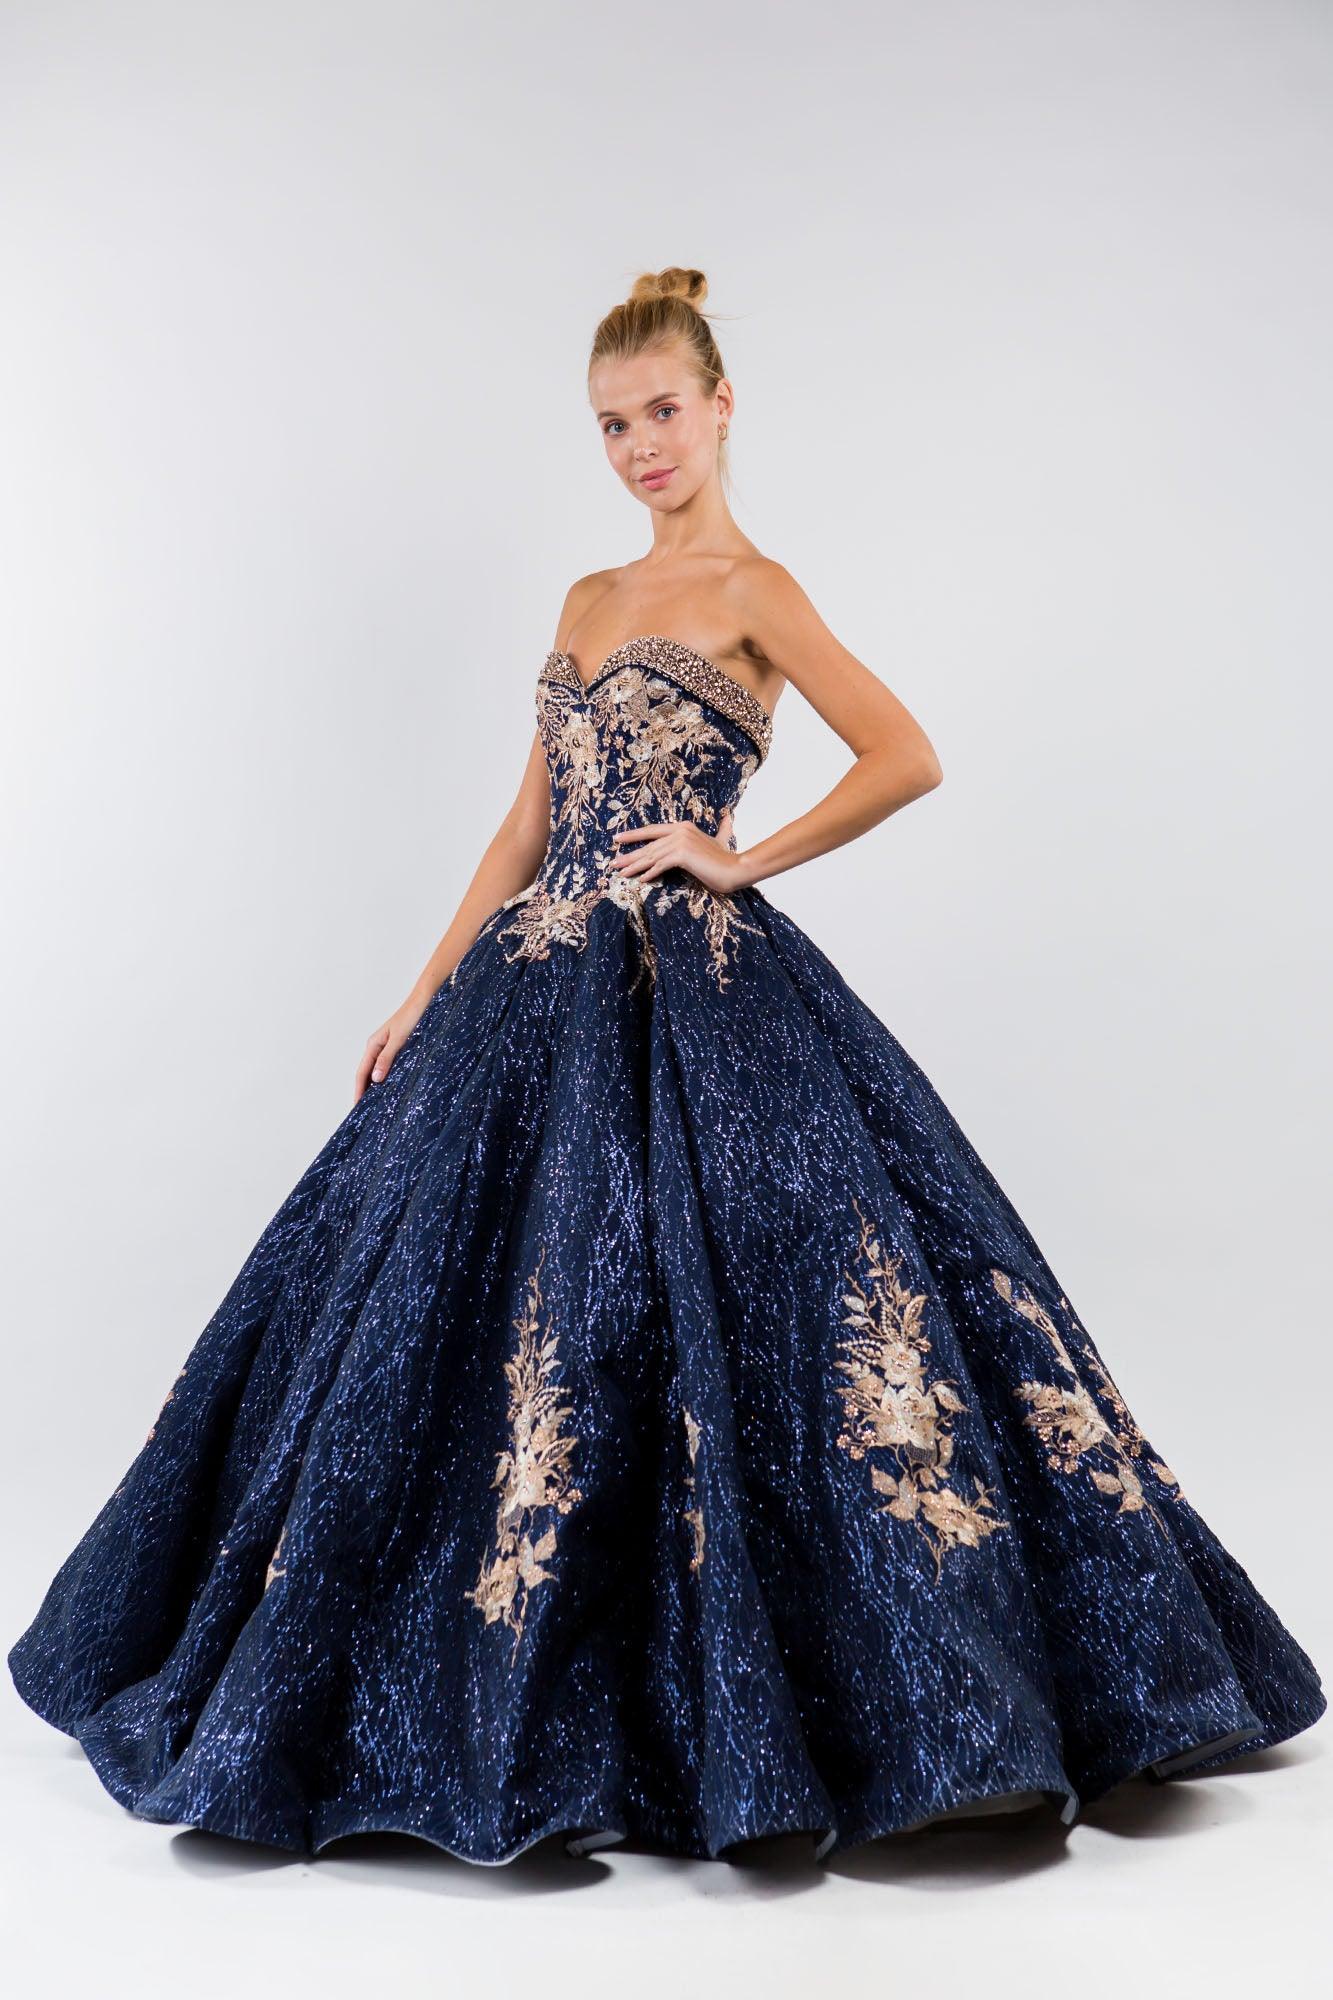 Rose Gold Quinceanera Floral Glitter Long Strapless Dress for $806.99 ...